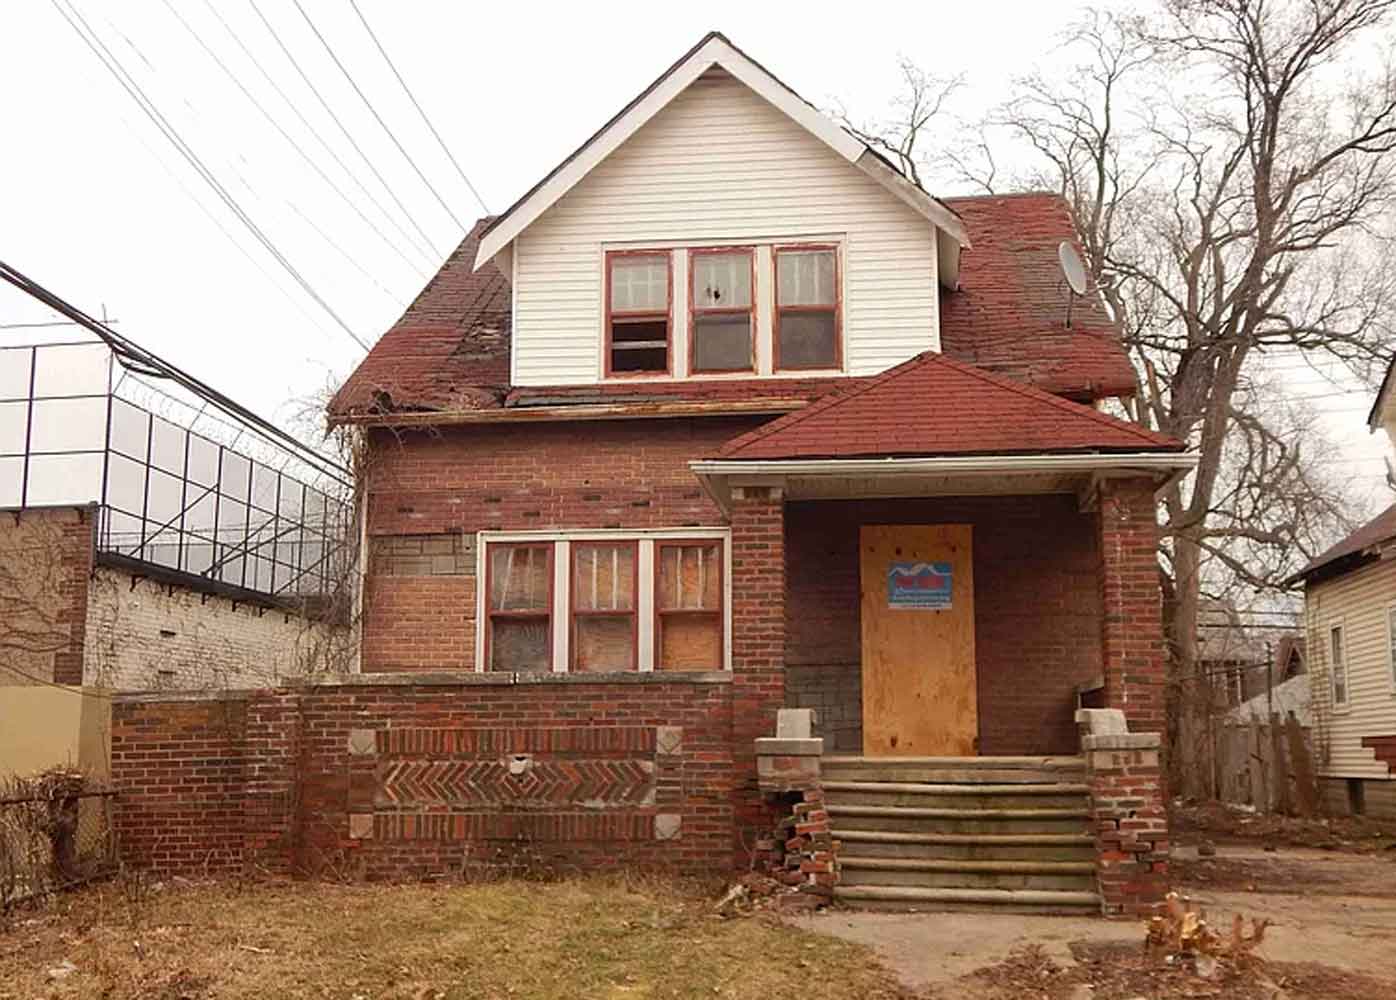 With the population well less than half its 1950 peak, many homes in Detroit are empty.